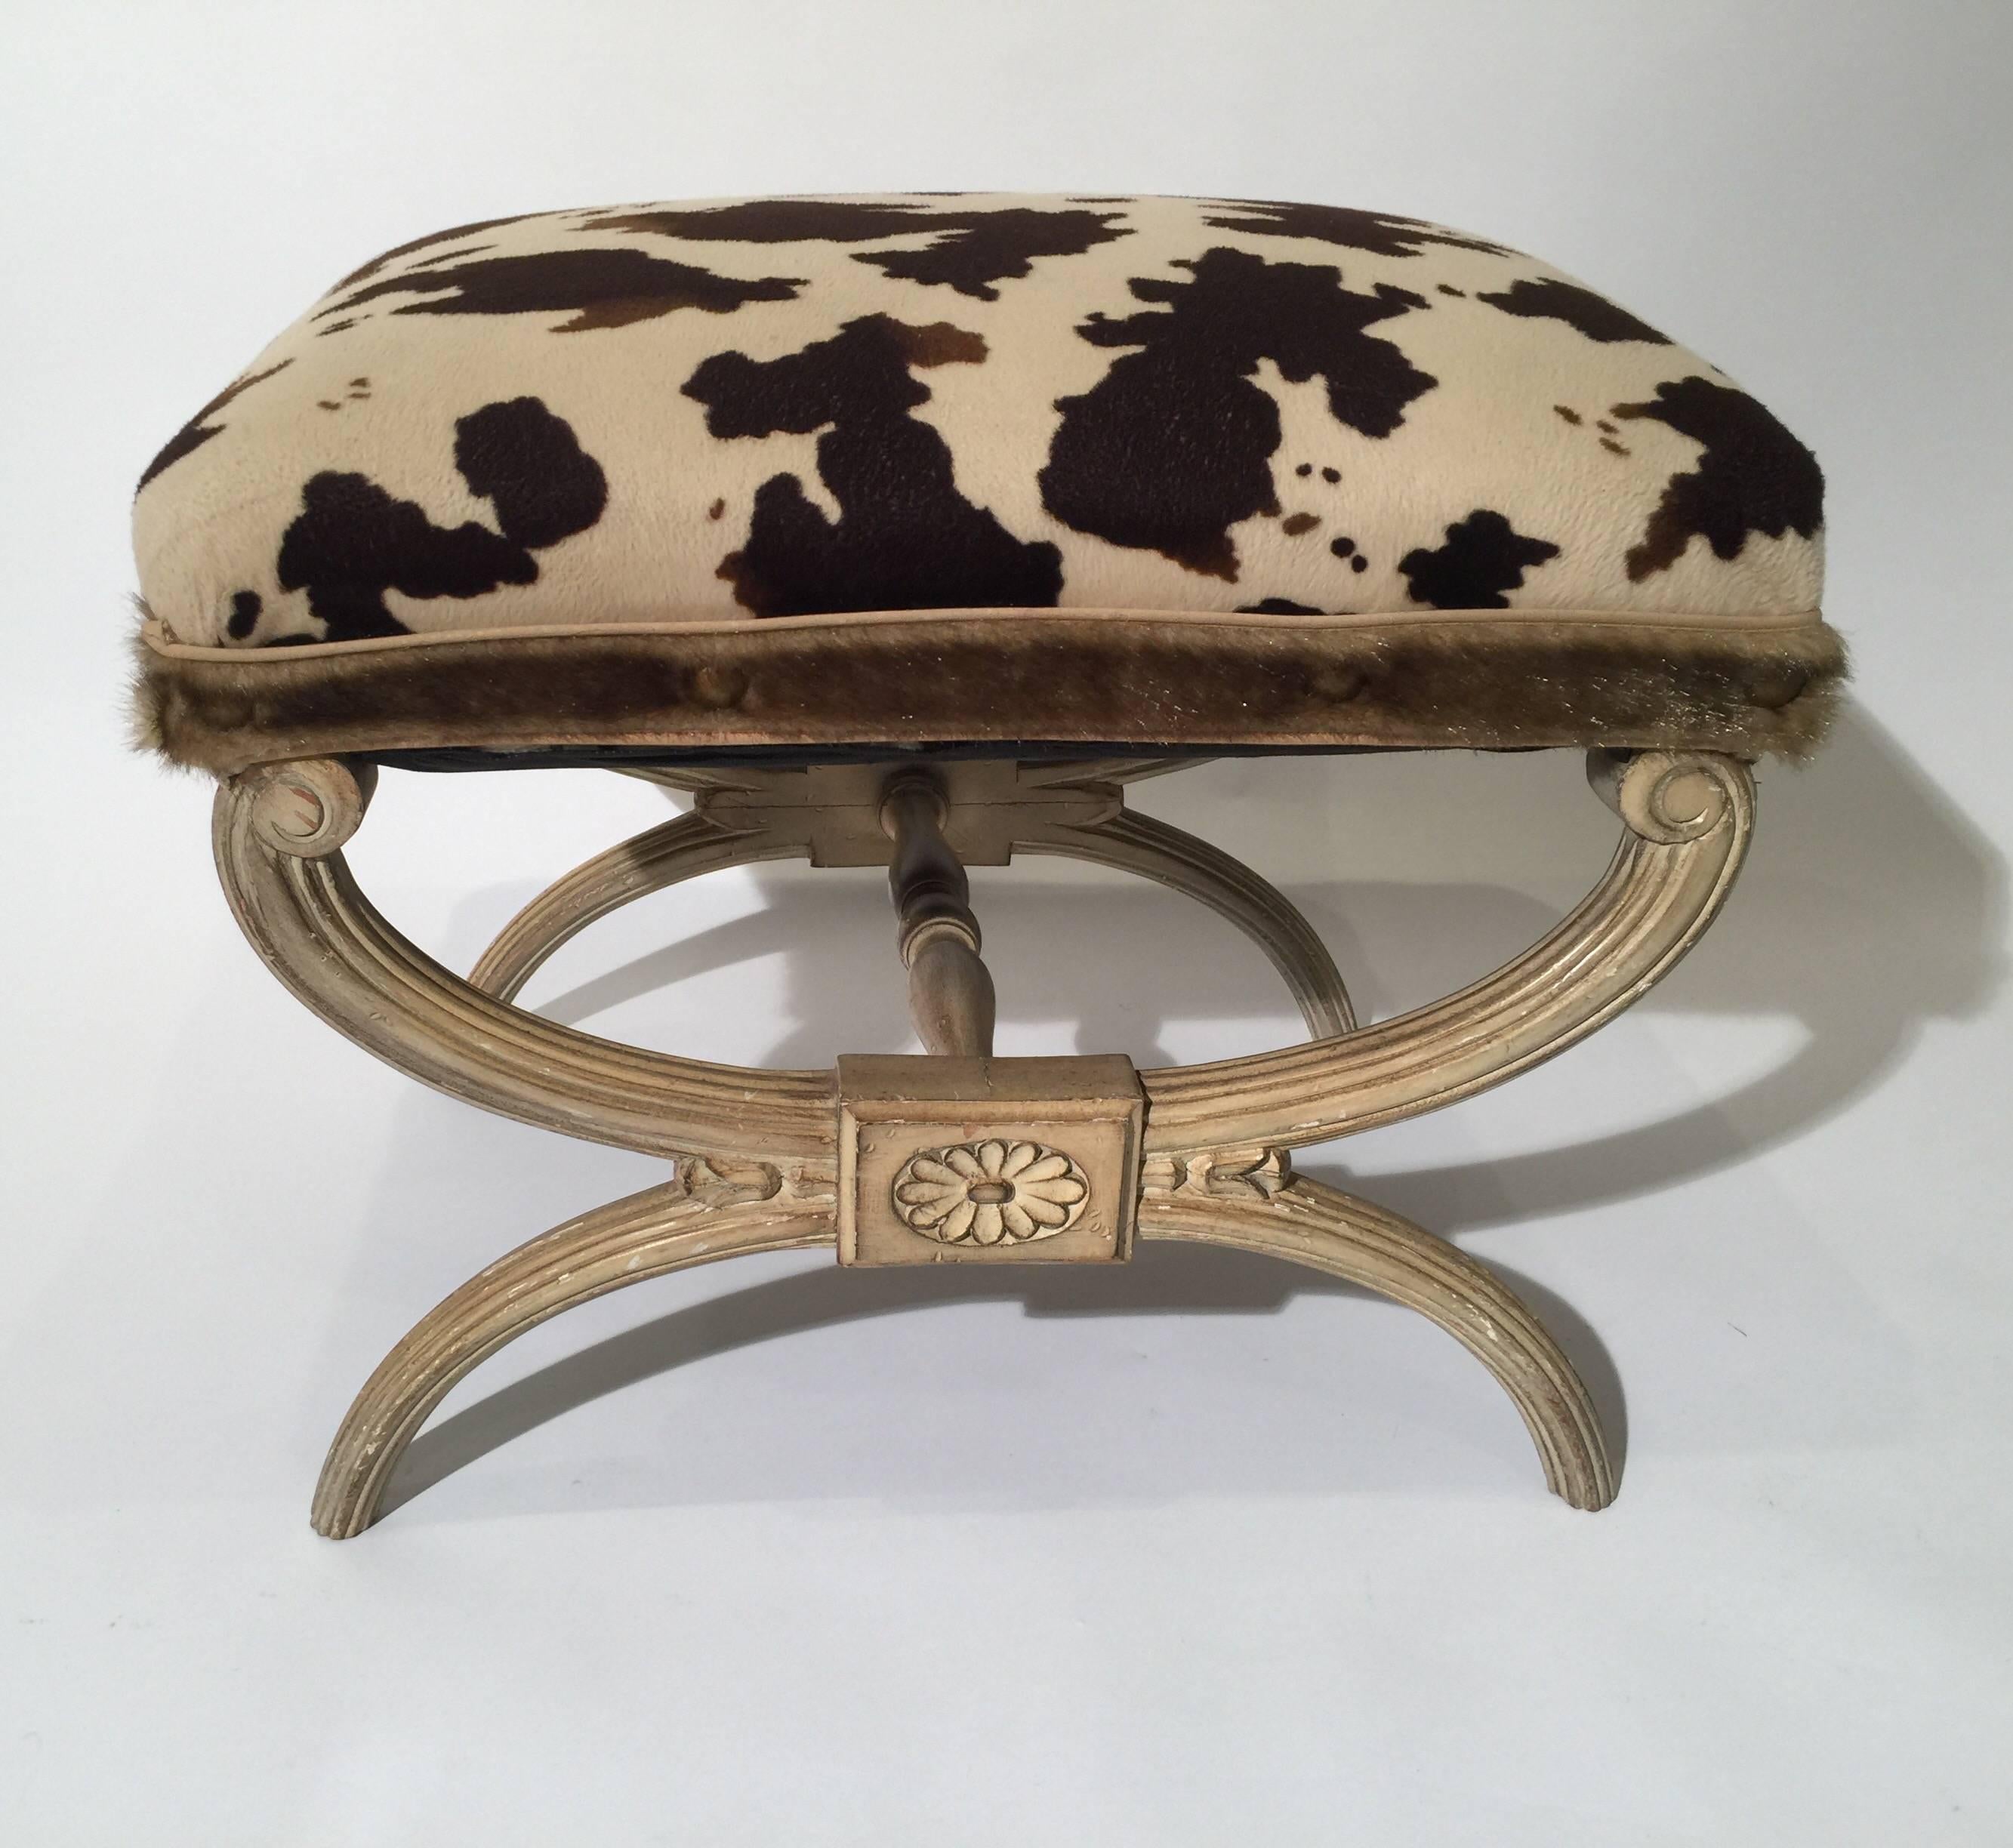 Midcentury neoclassical X-bench with faux cowhide animal print upholstery,
High style designer X-bench with hand carved painted wood base. The fabric is a short plush animal print covering with a faux fur trim. Italian, mid-20th century.